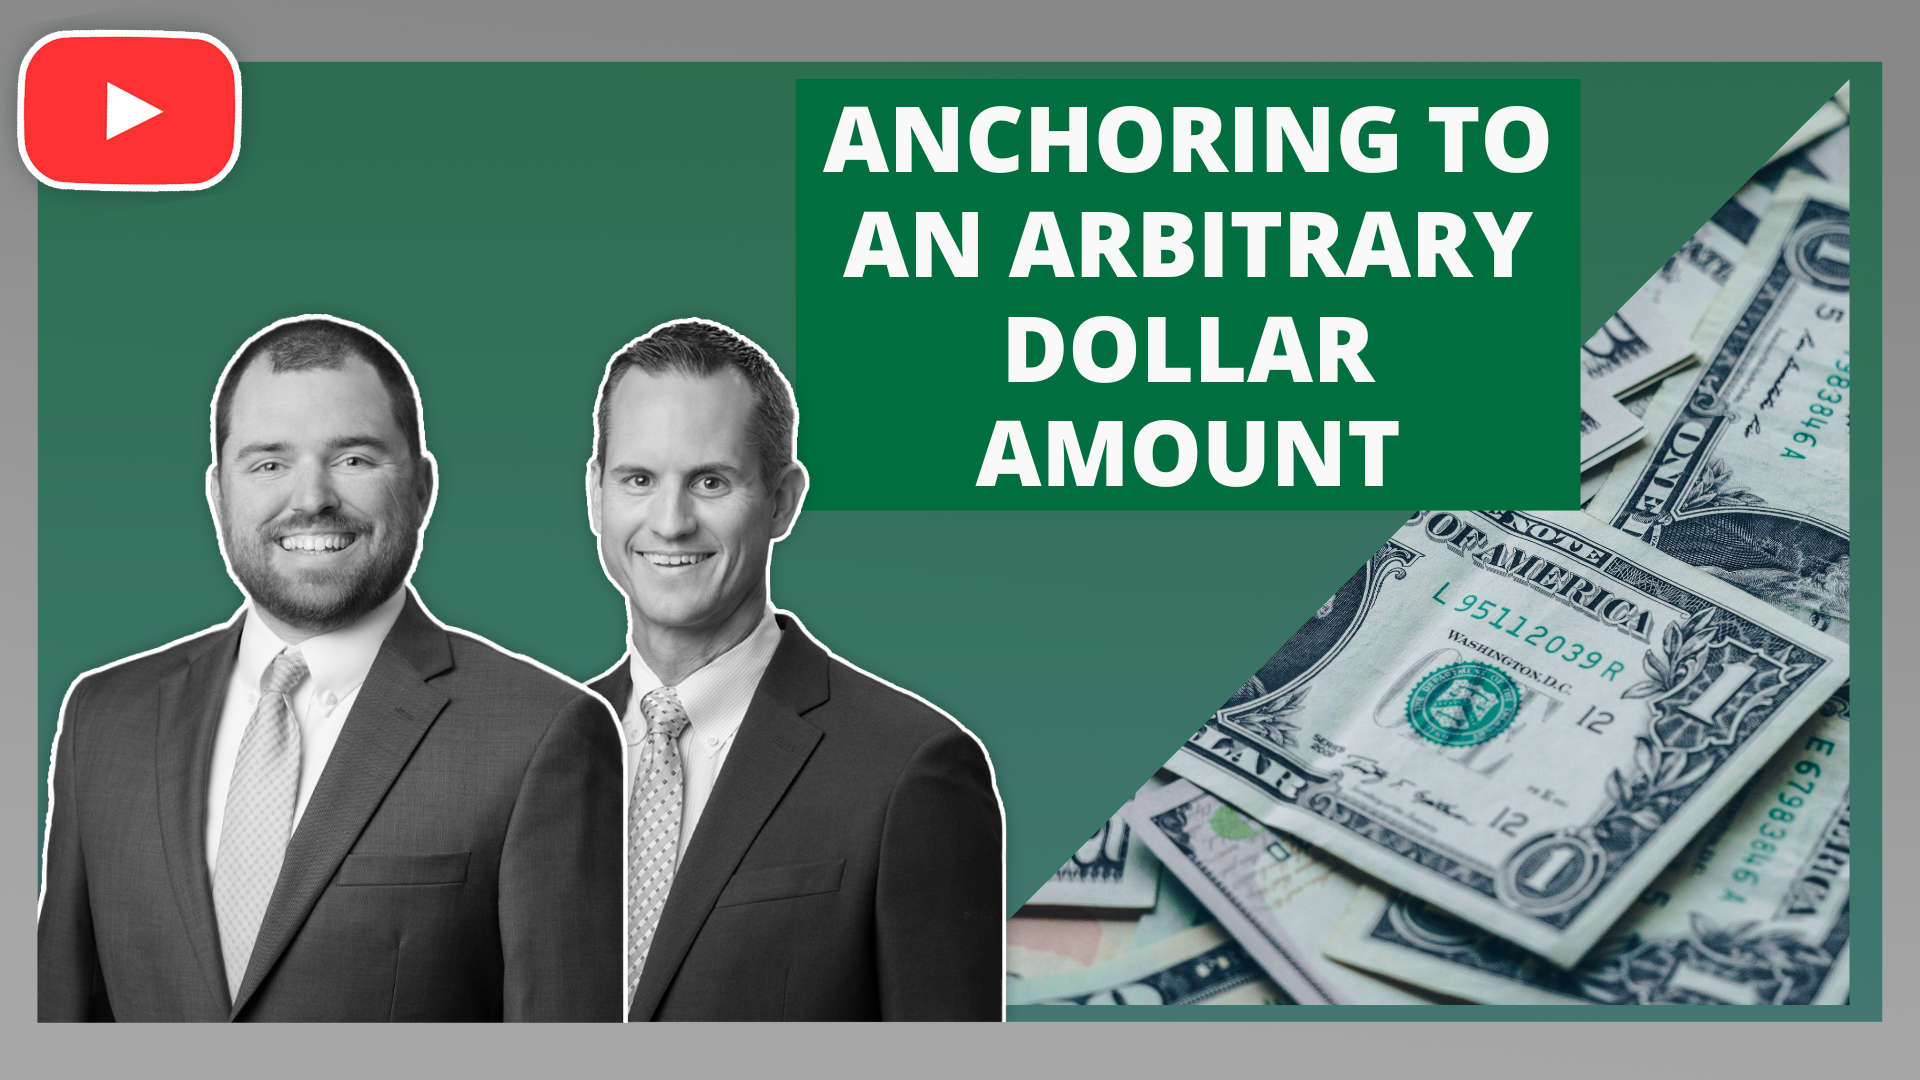 Anchoring to an arbitrary dollar amount